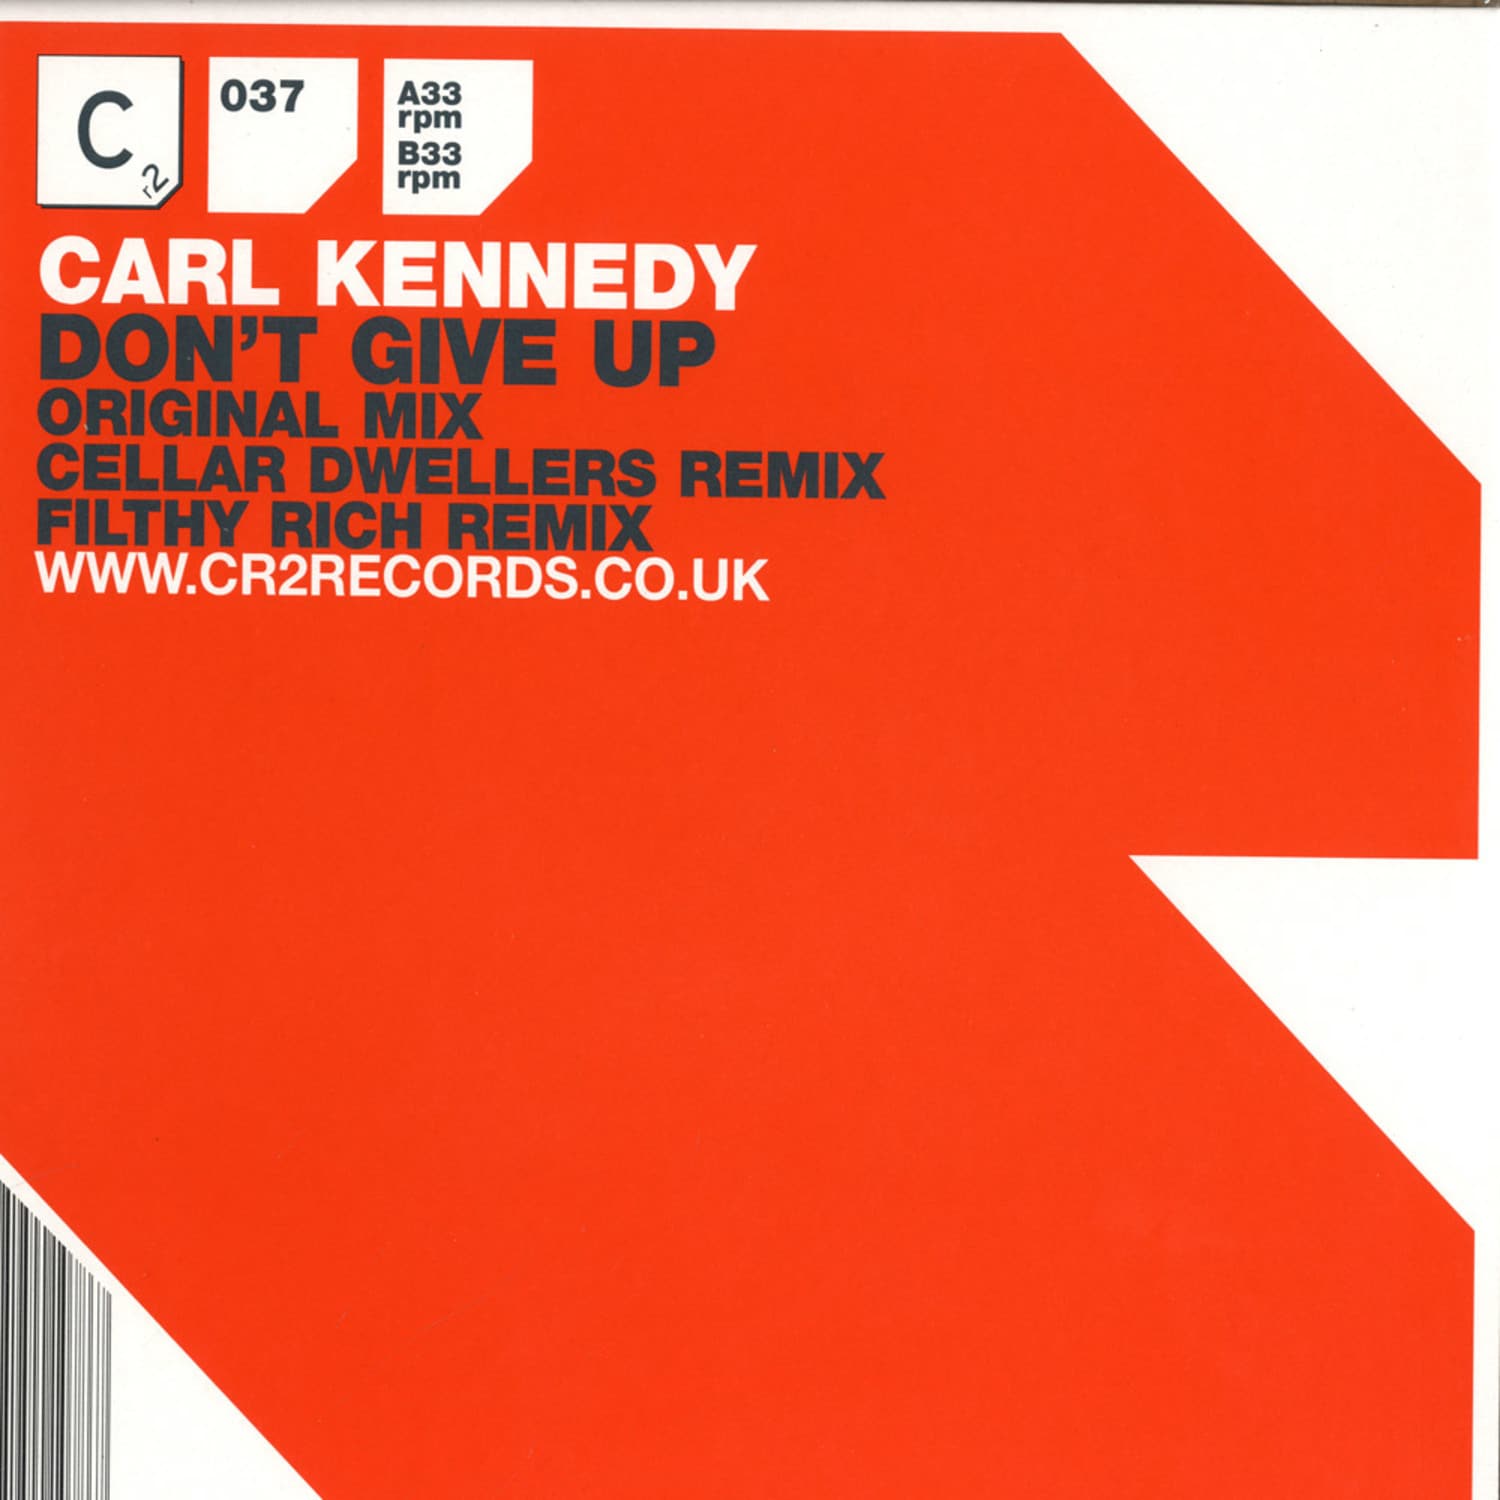 Carl Kennedy - DONT GIVE UP